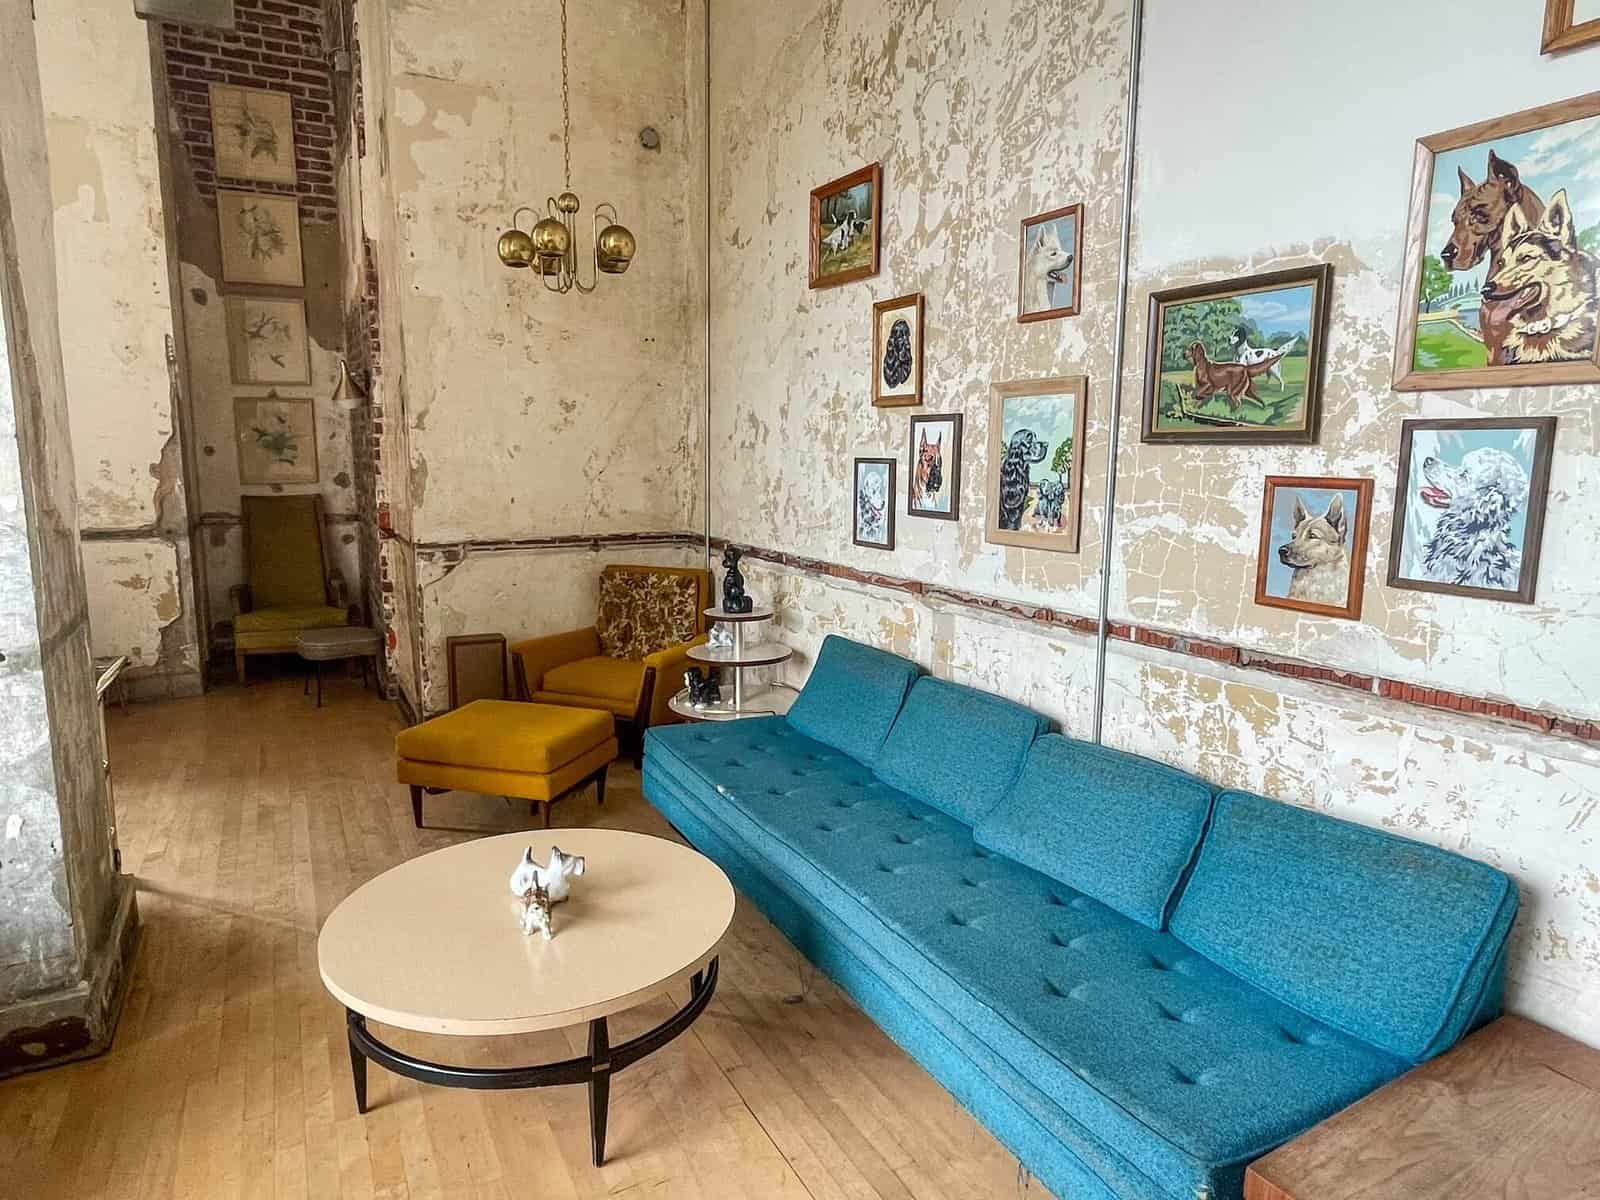 A bright blue couch, vintage style chair, decor, and artwork of dogs in the cool hidden bar in Memphis.